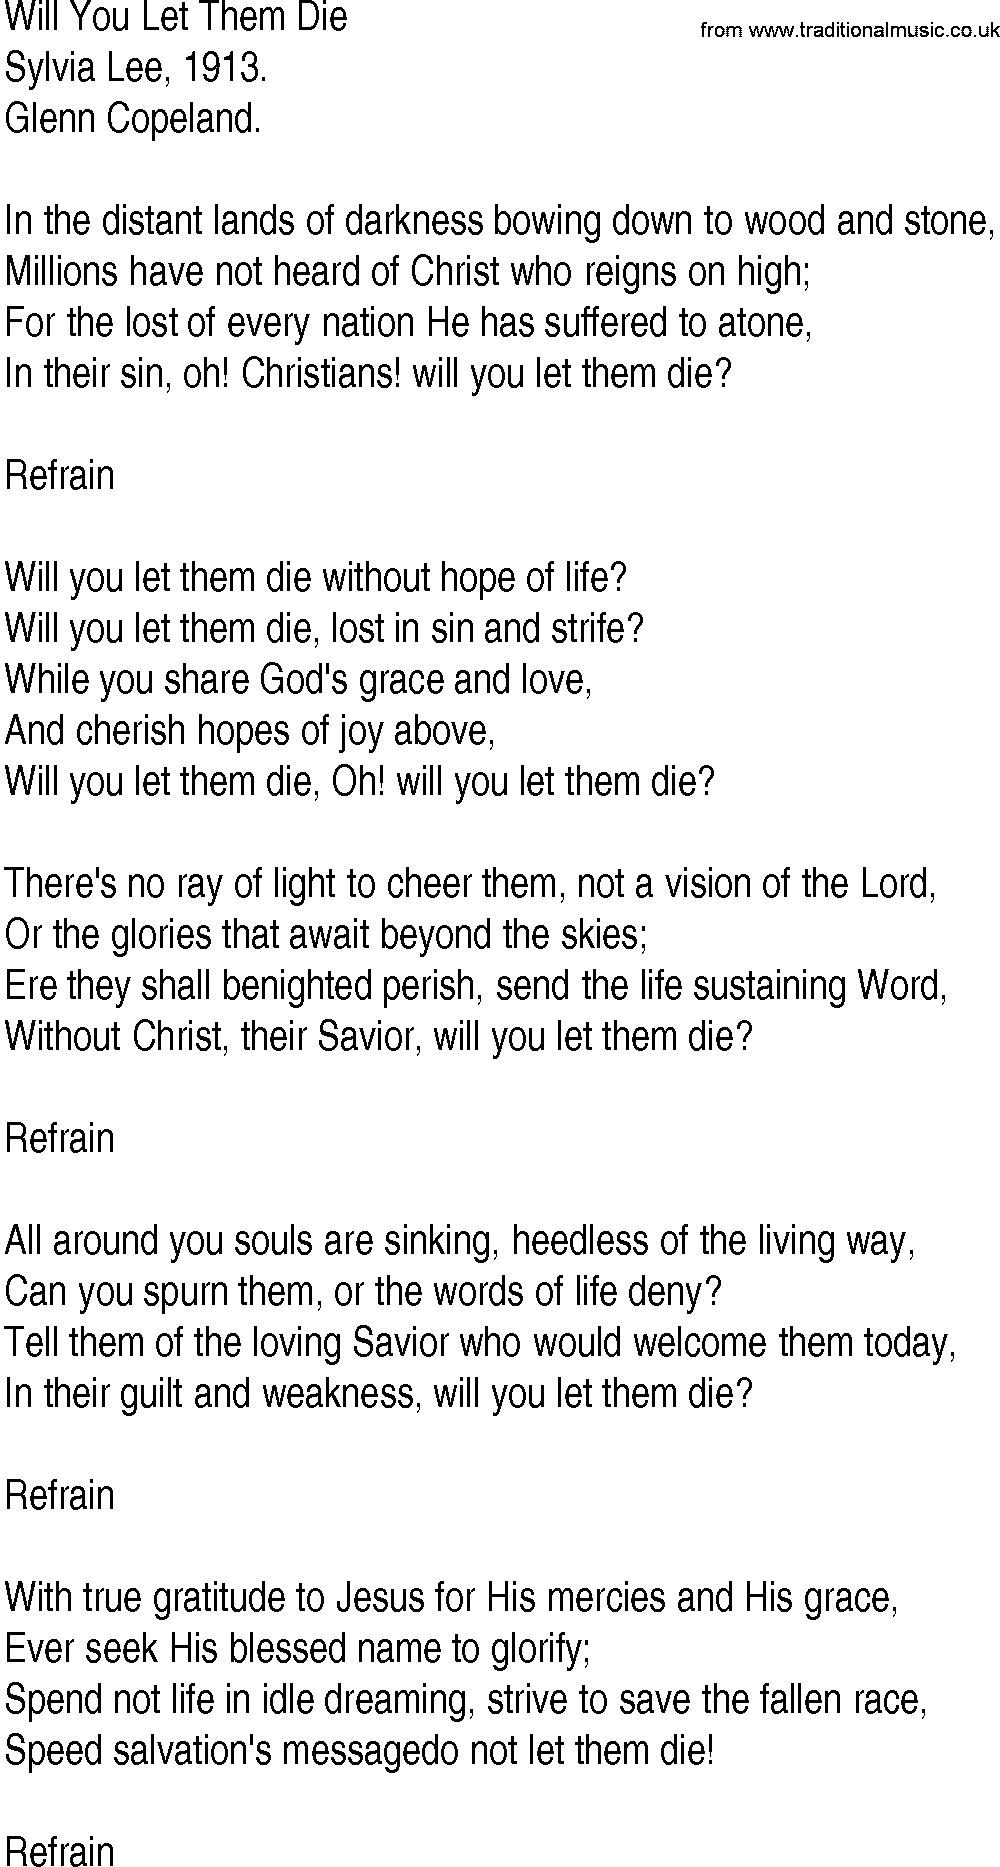 Hymn and Gospel Song: Will You Let Them Die by Sylvia Lee lyrics